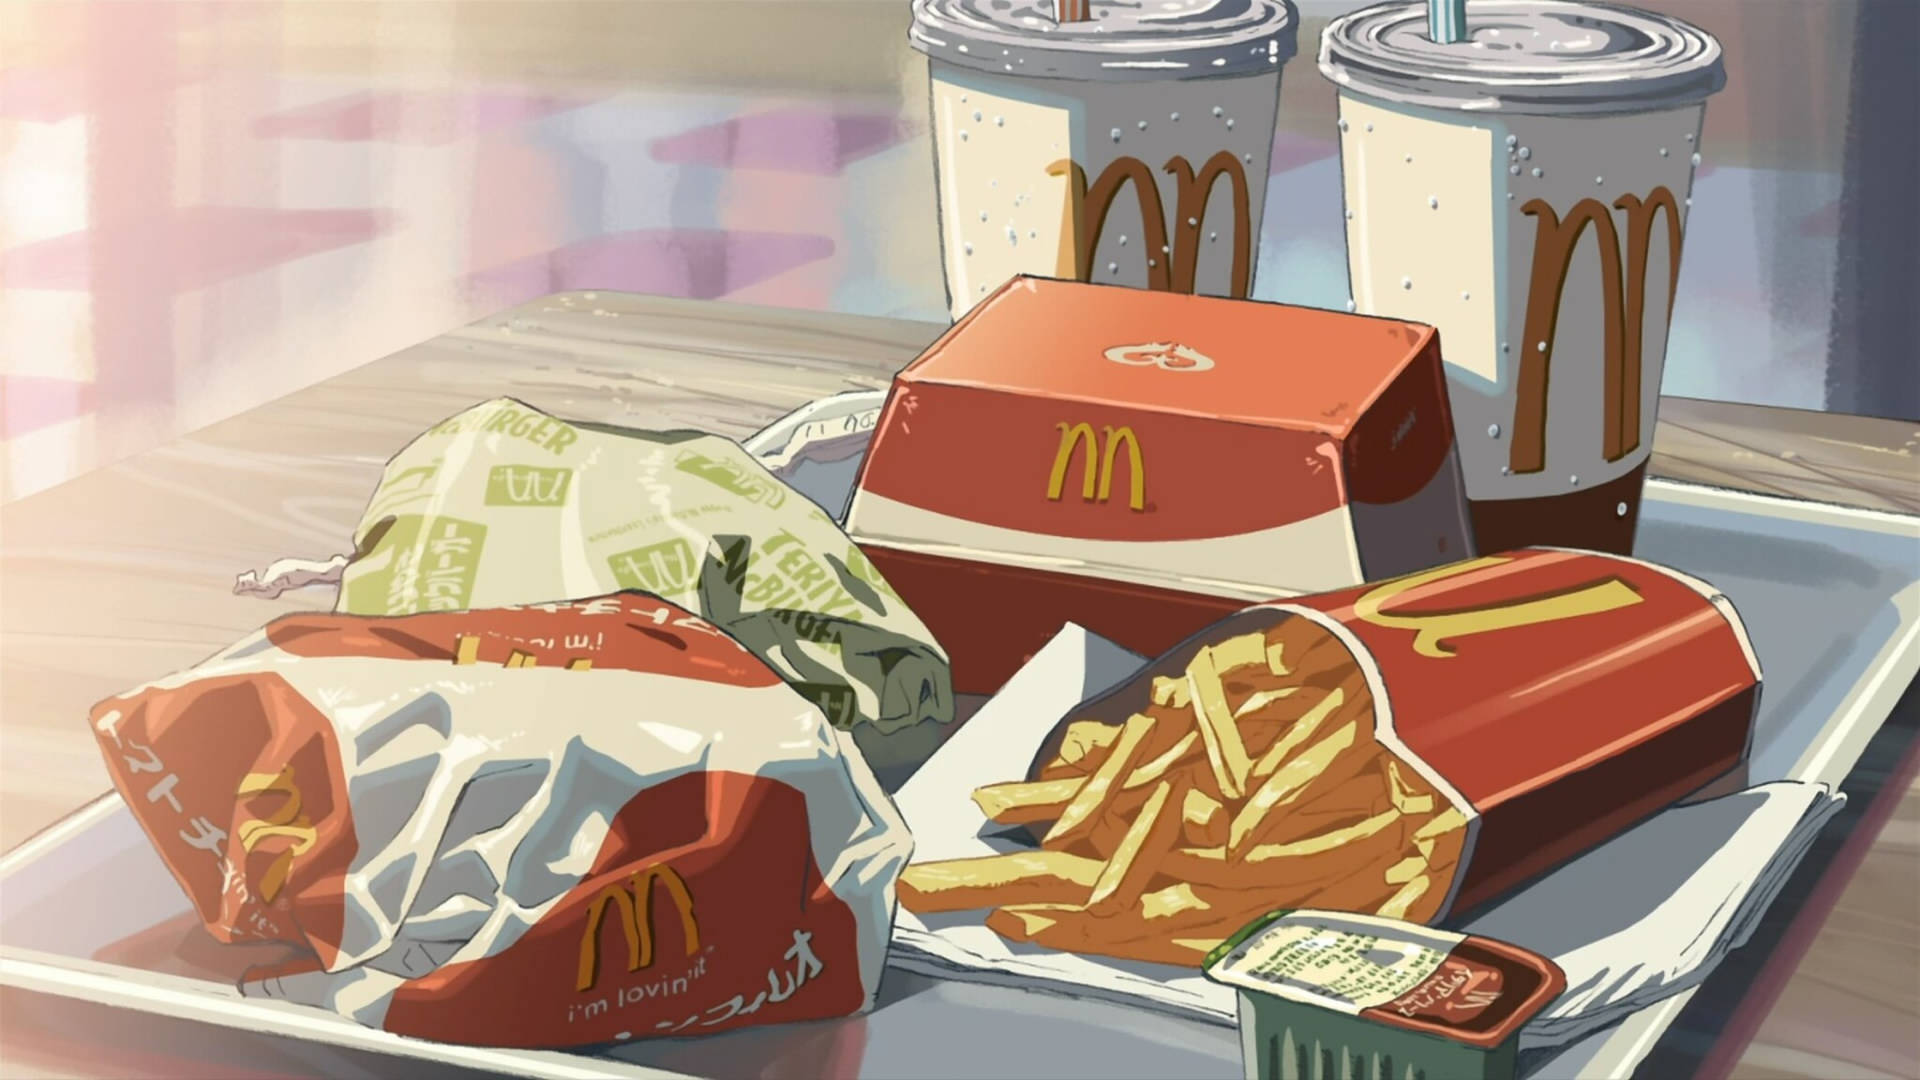 Mcdonald's Happy Meal With Iconic Mascots